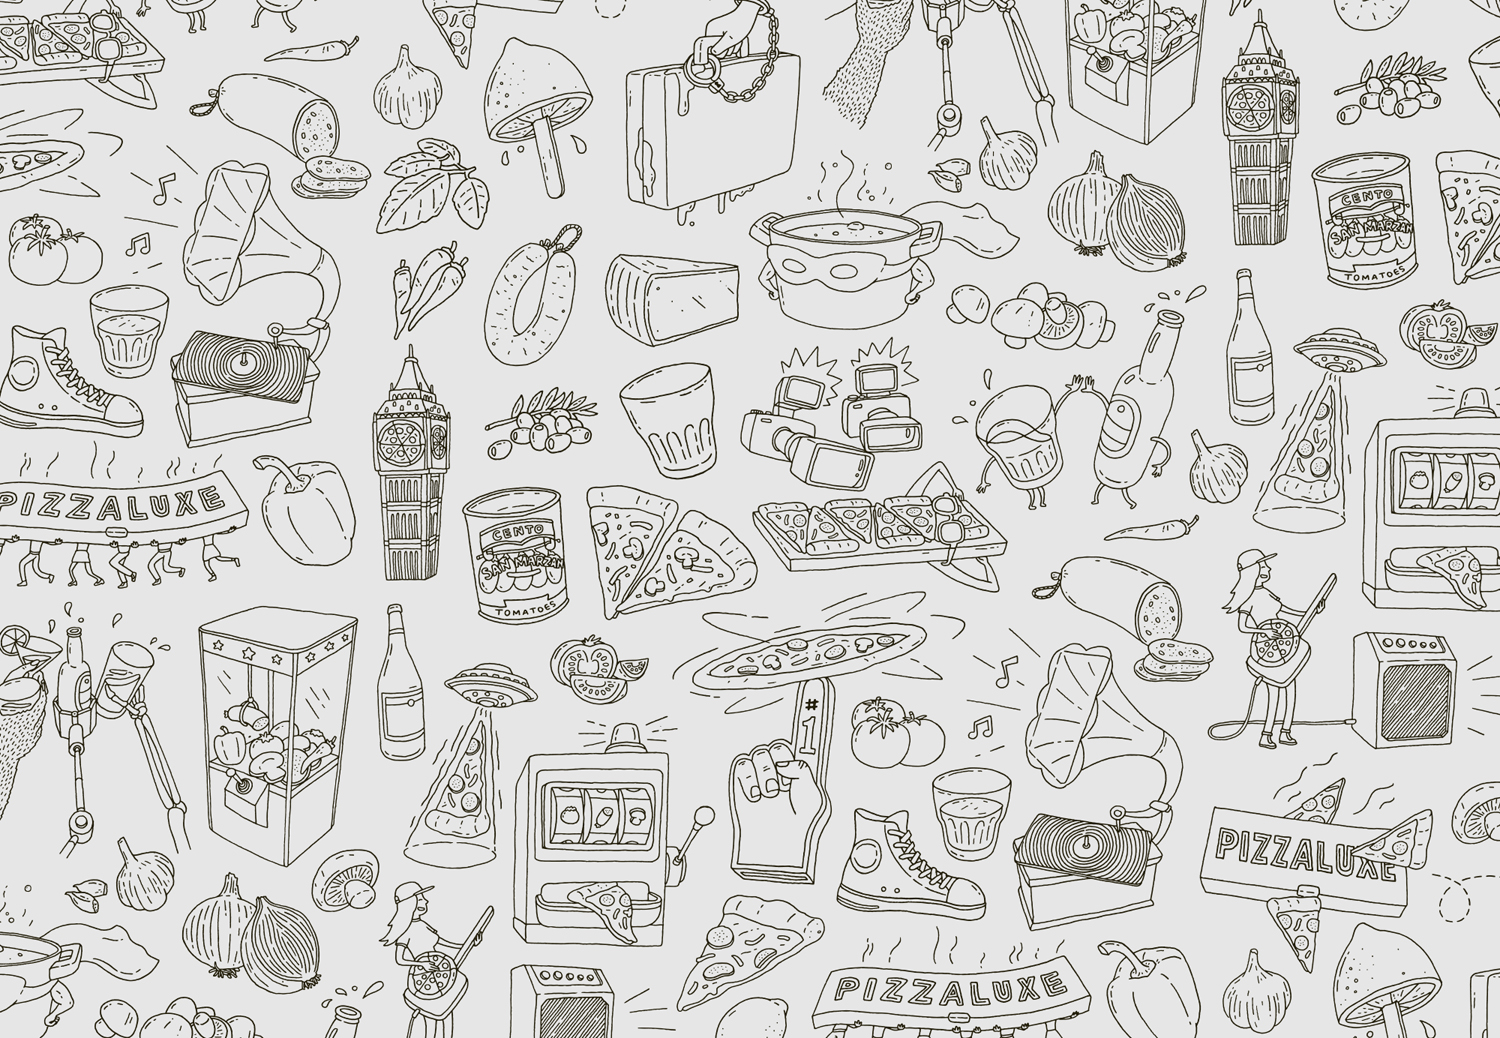 Illustrations by Damien Weighill and Joanna Basford for PizzaLuxe